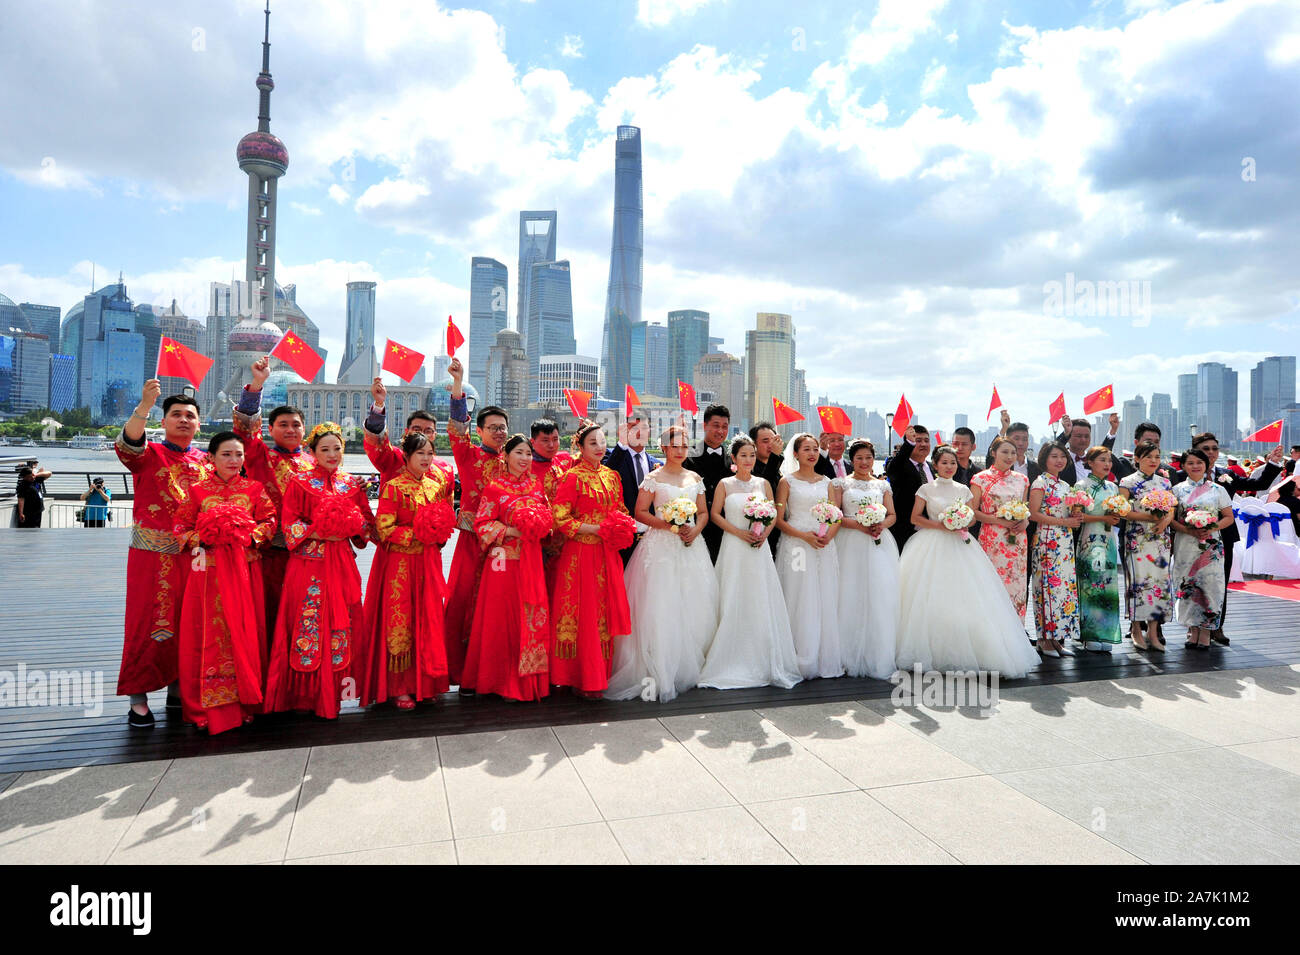 15 couples held group weddings by the Huangpu river to celebrate the 70th anniversary of the founding of PRC in Shanghai, China, 19 September 2019. Stock Photo